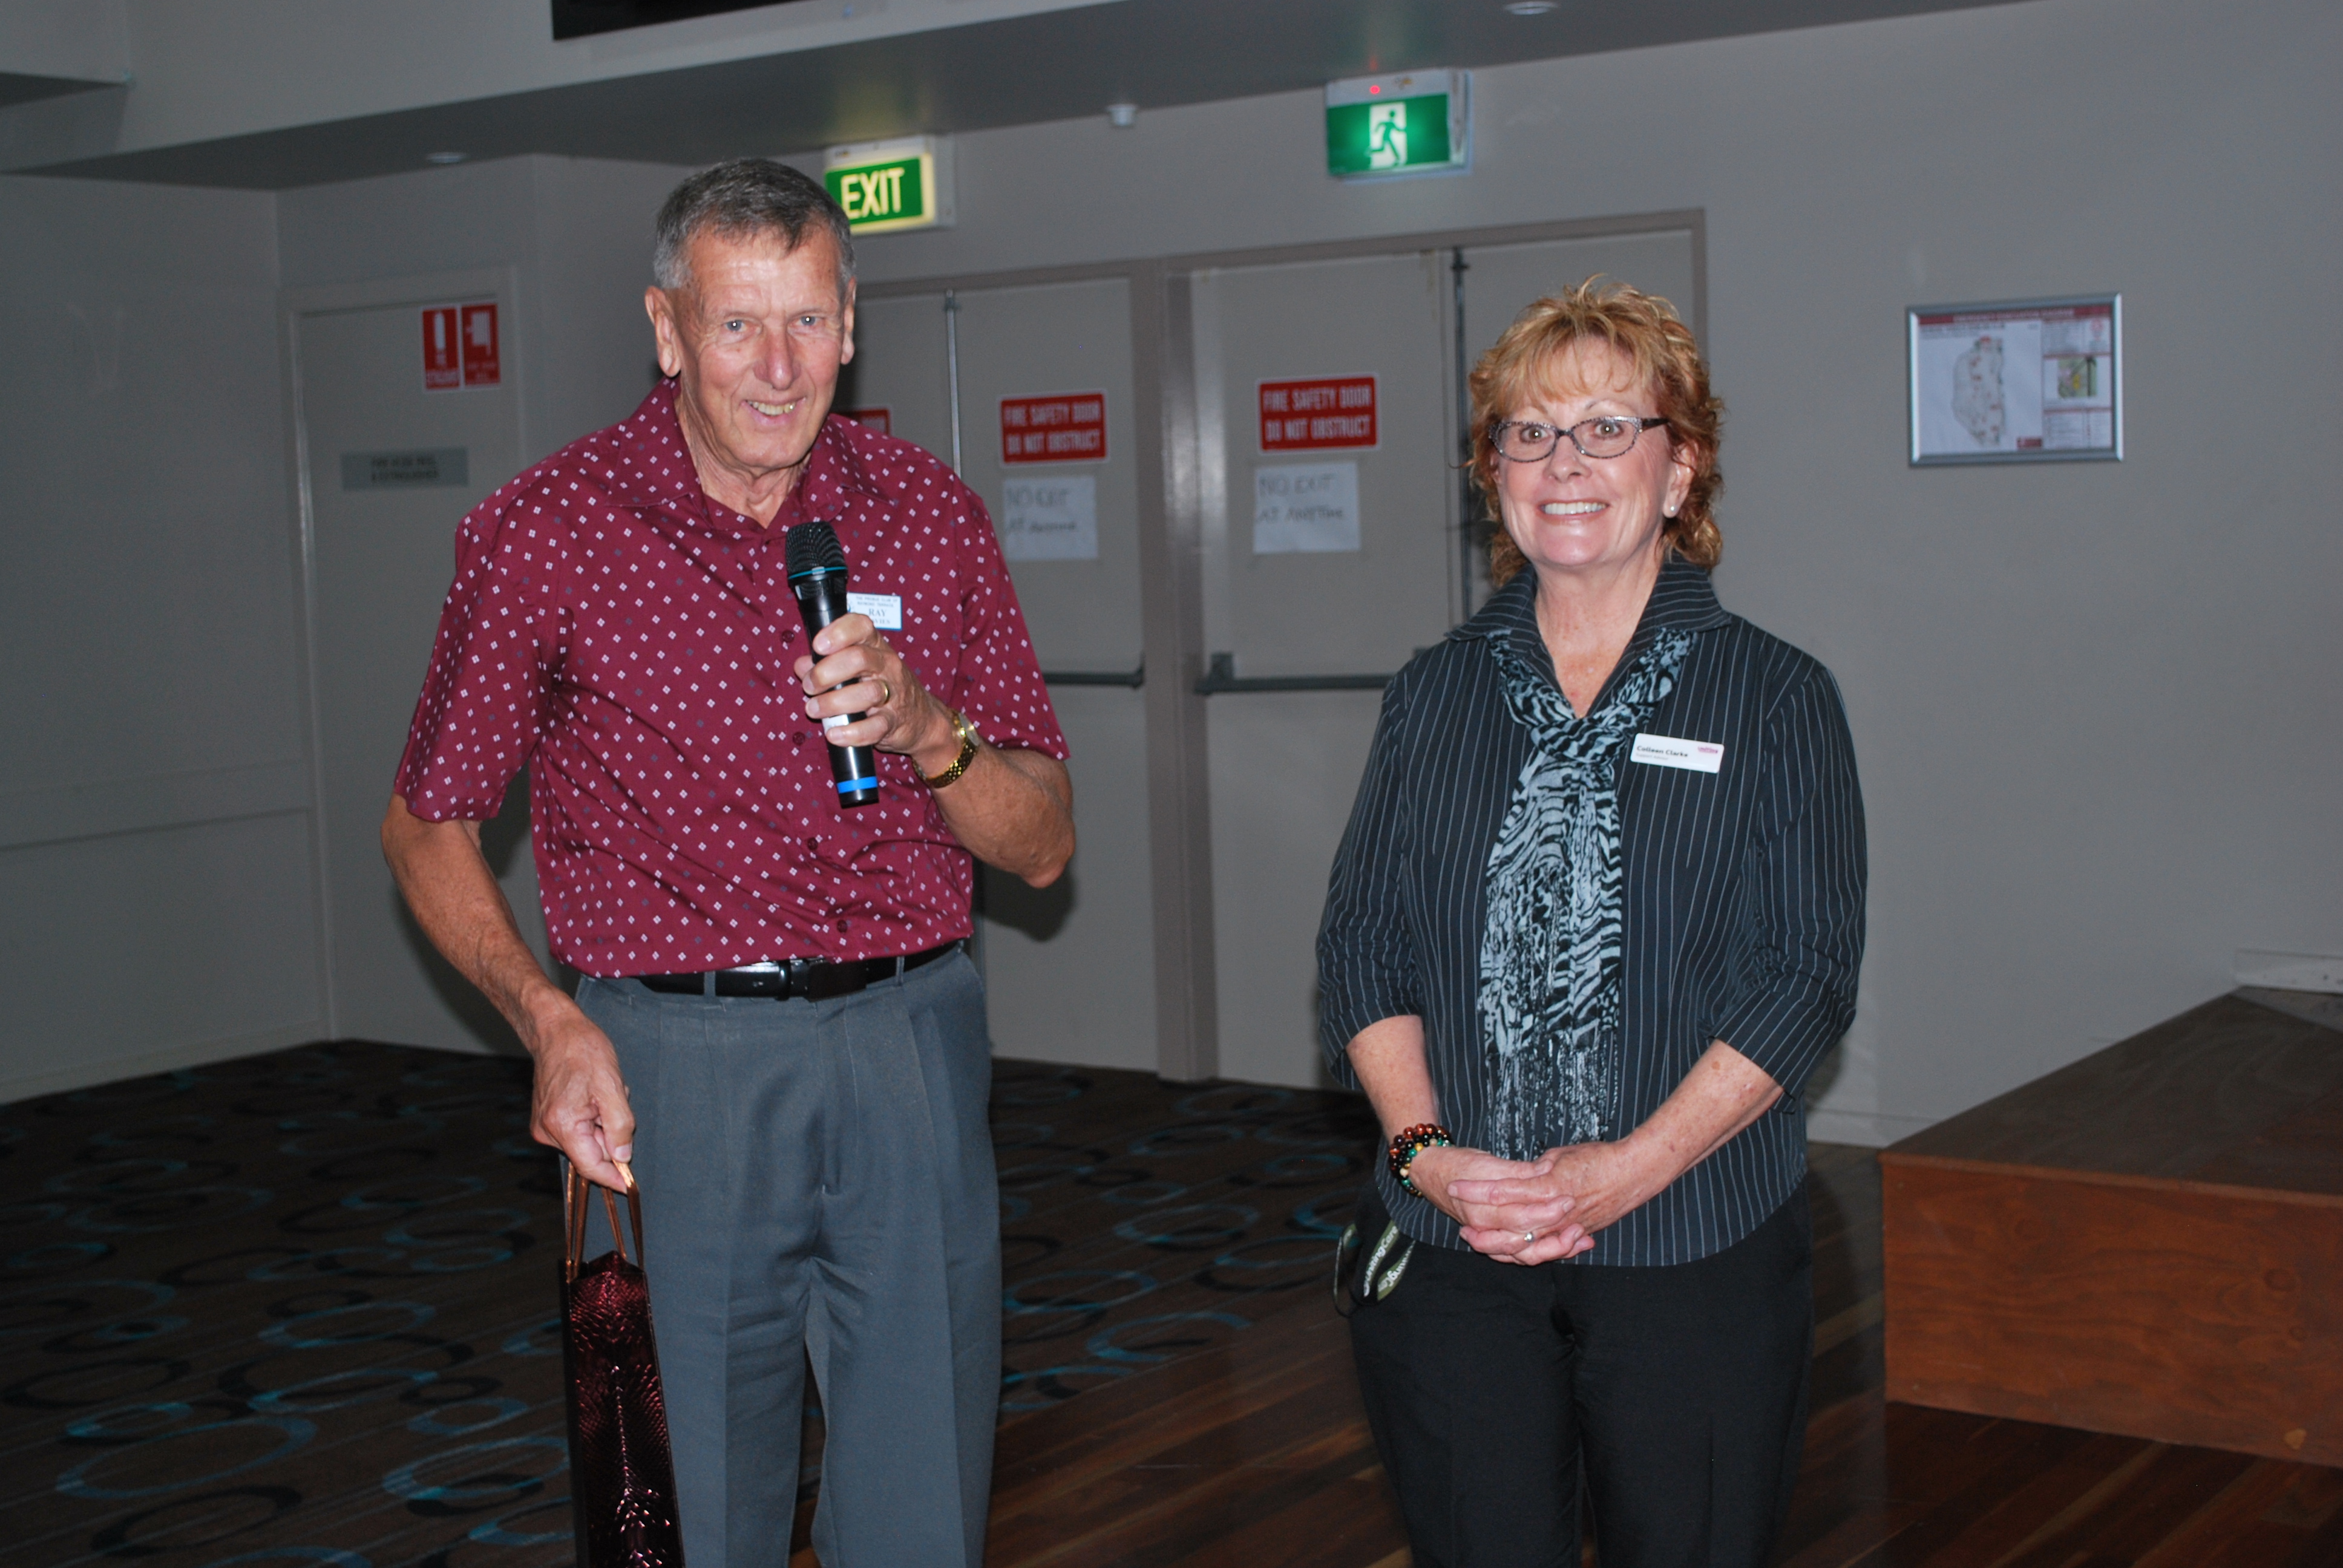 Ray Davies thanking guest speaker Colleen Clark from Uniting who enlightened the Probus group on Community Home Care Packages. 